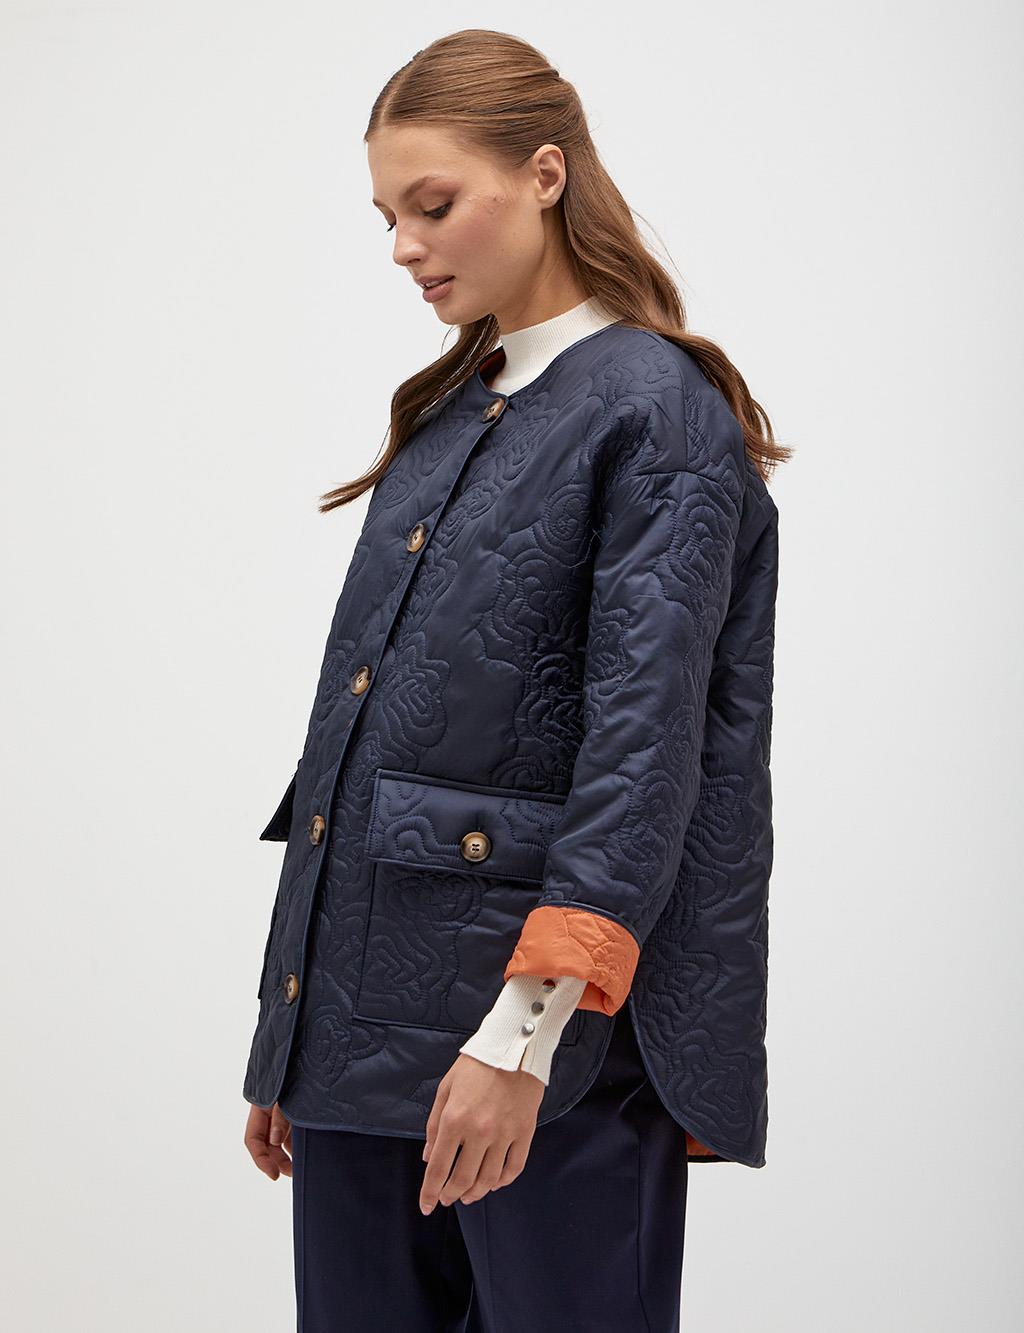 Abstract Pattern Stitched Jacket Navy